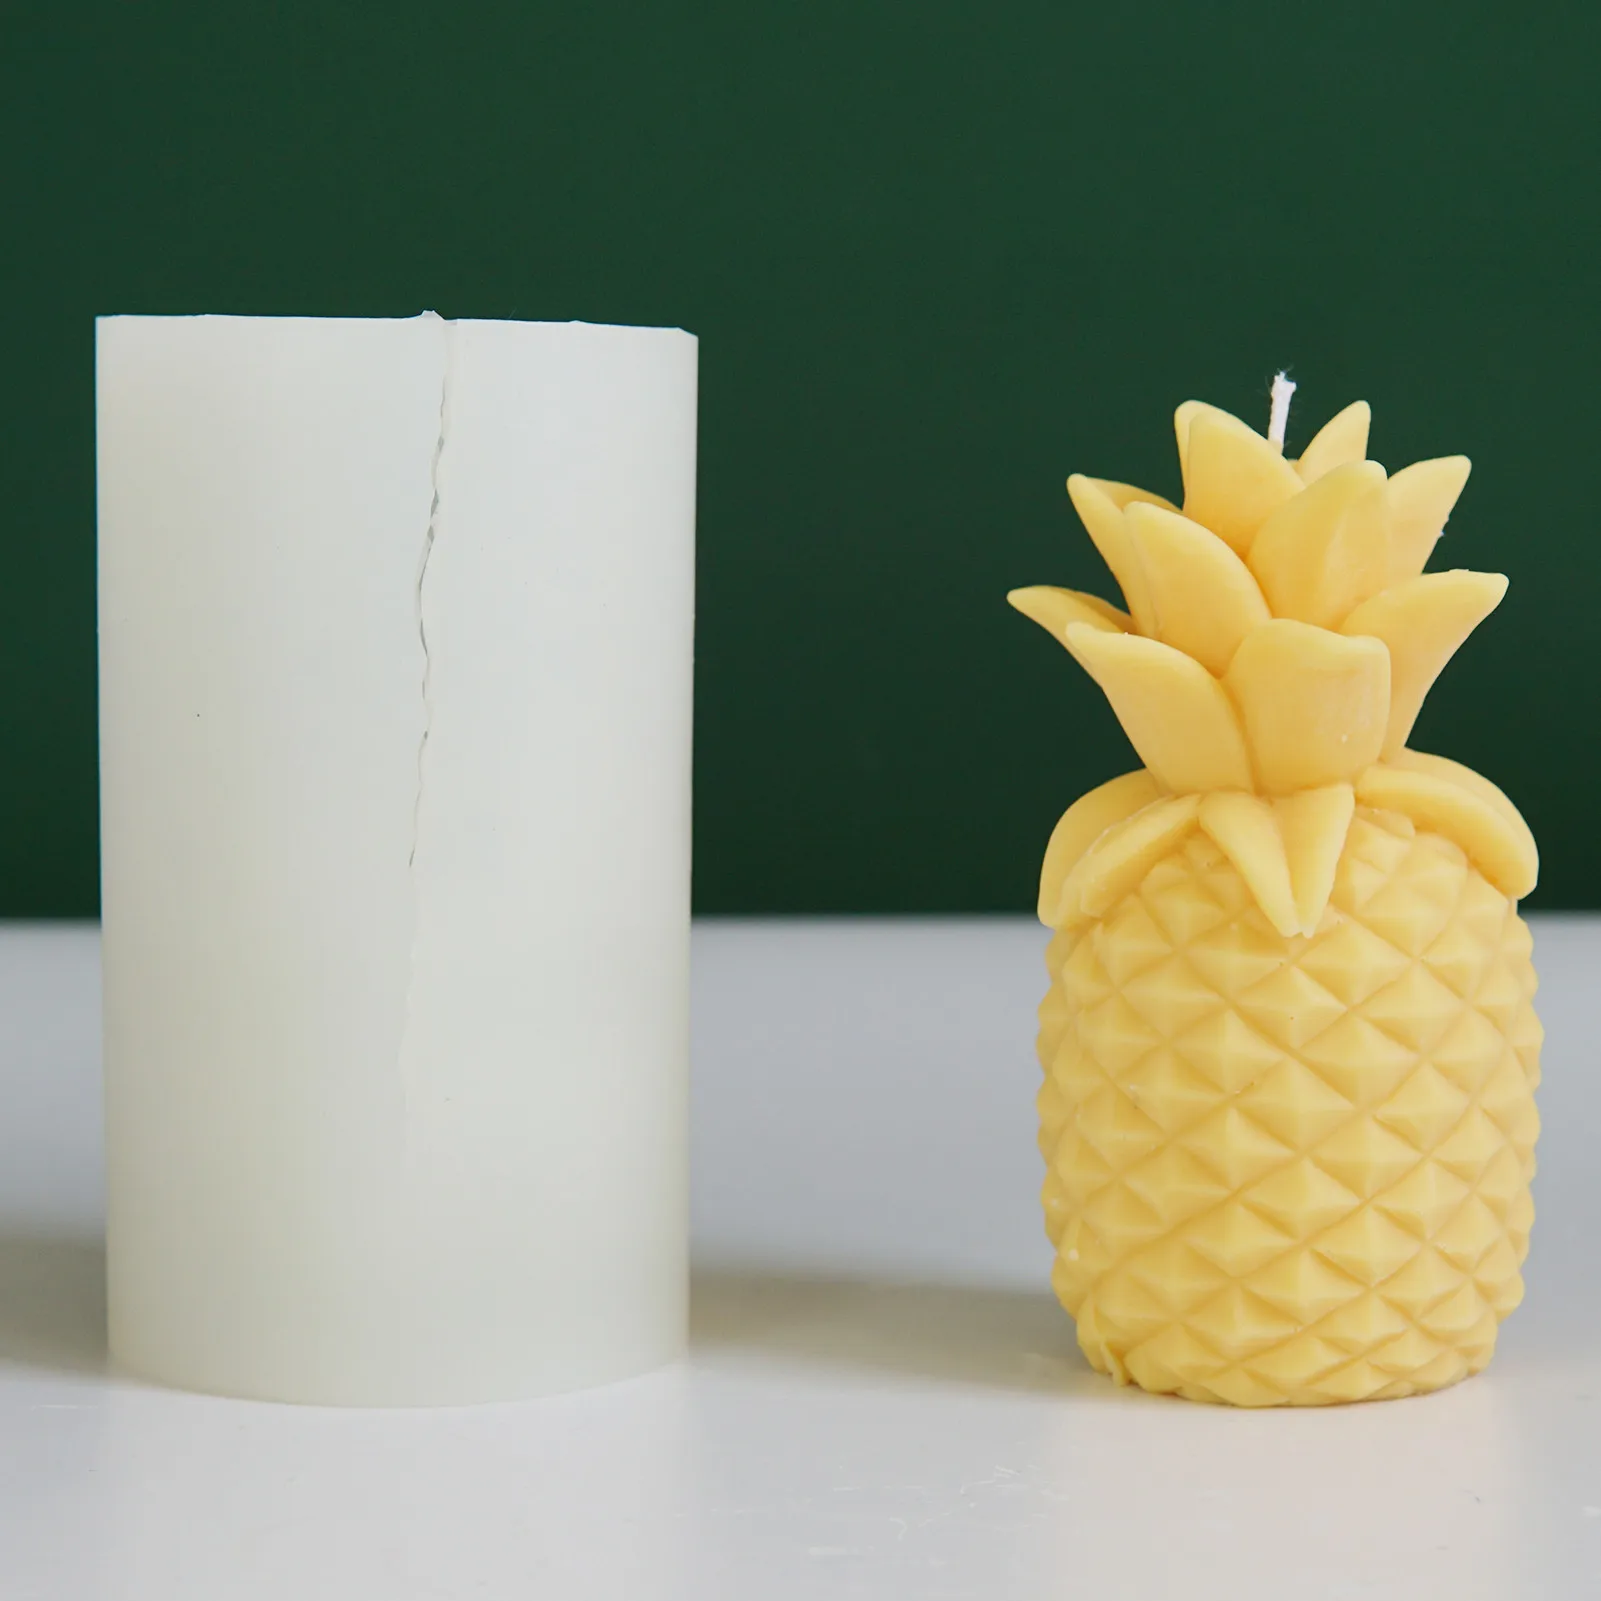 3D Simulation Pineapple Silicone Candle Mold Reusable Novel Silicone Mould Cake Chocolate Pudding Mold Aromatherapy Stones Mold